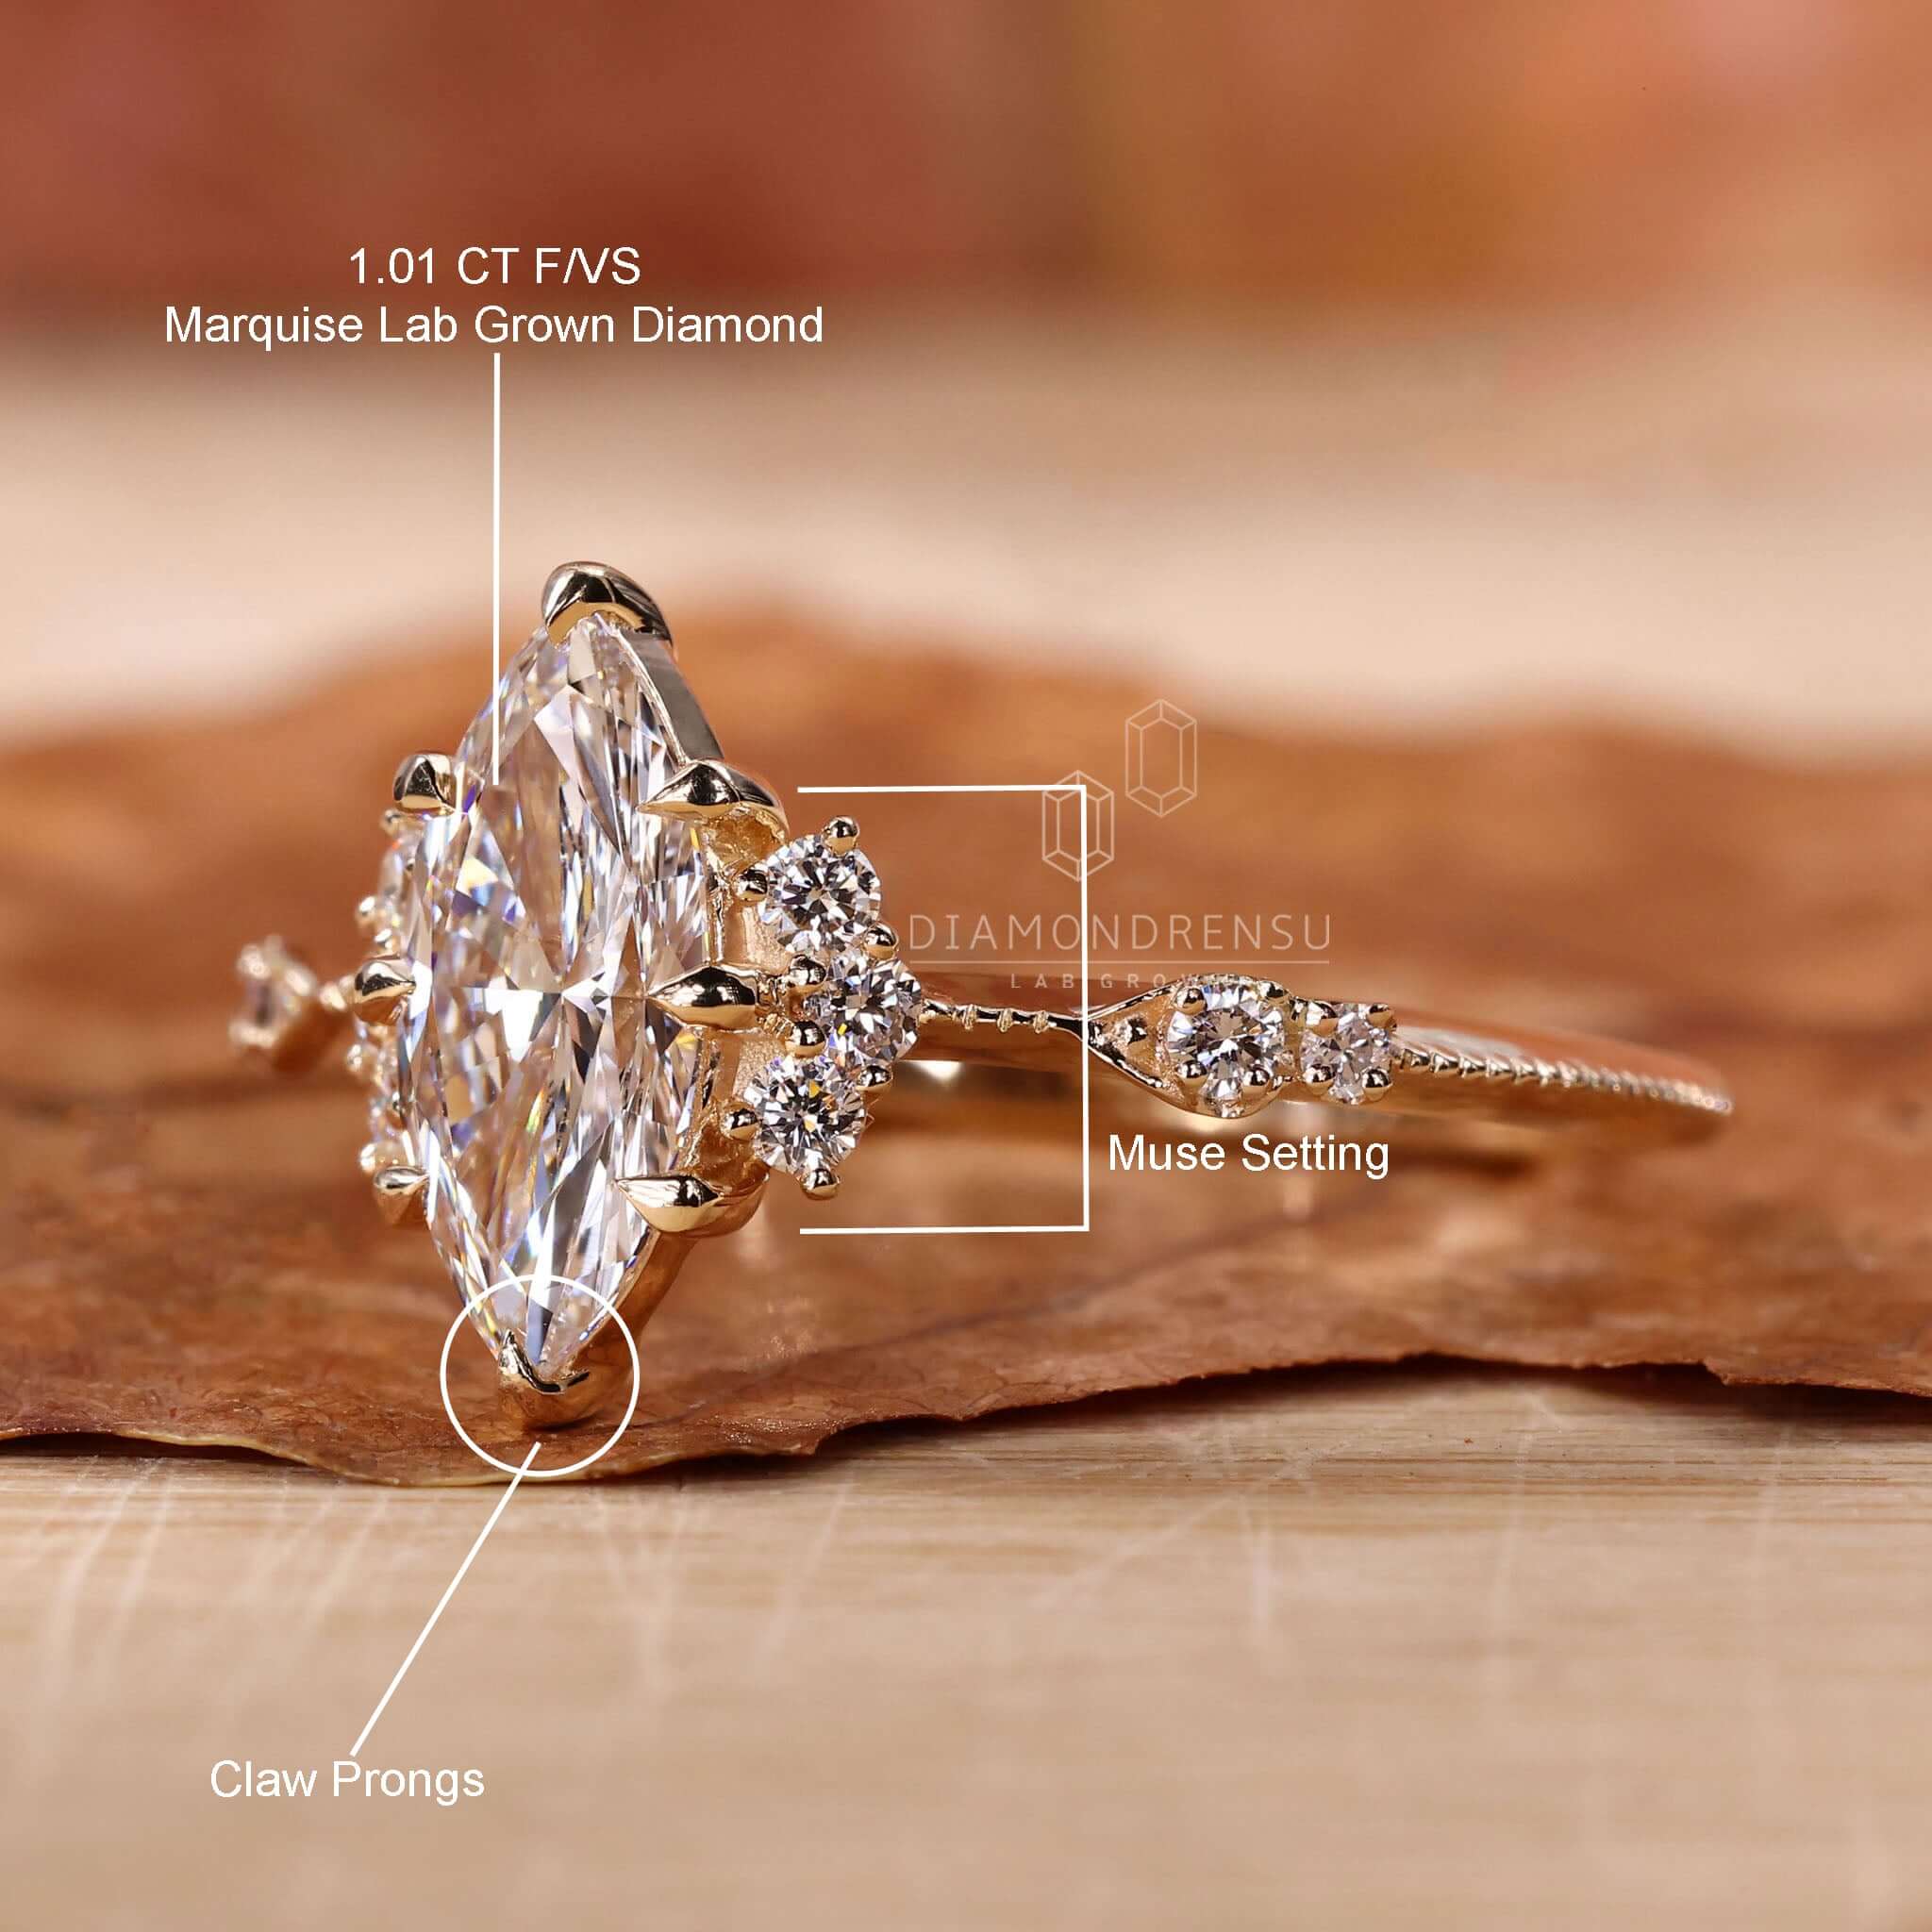 30 Timeless Classic Engagement Rings For Beautiful Women  Classic wedding  rings, Classic engagement rings, Unique engagement rings